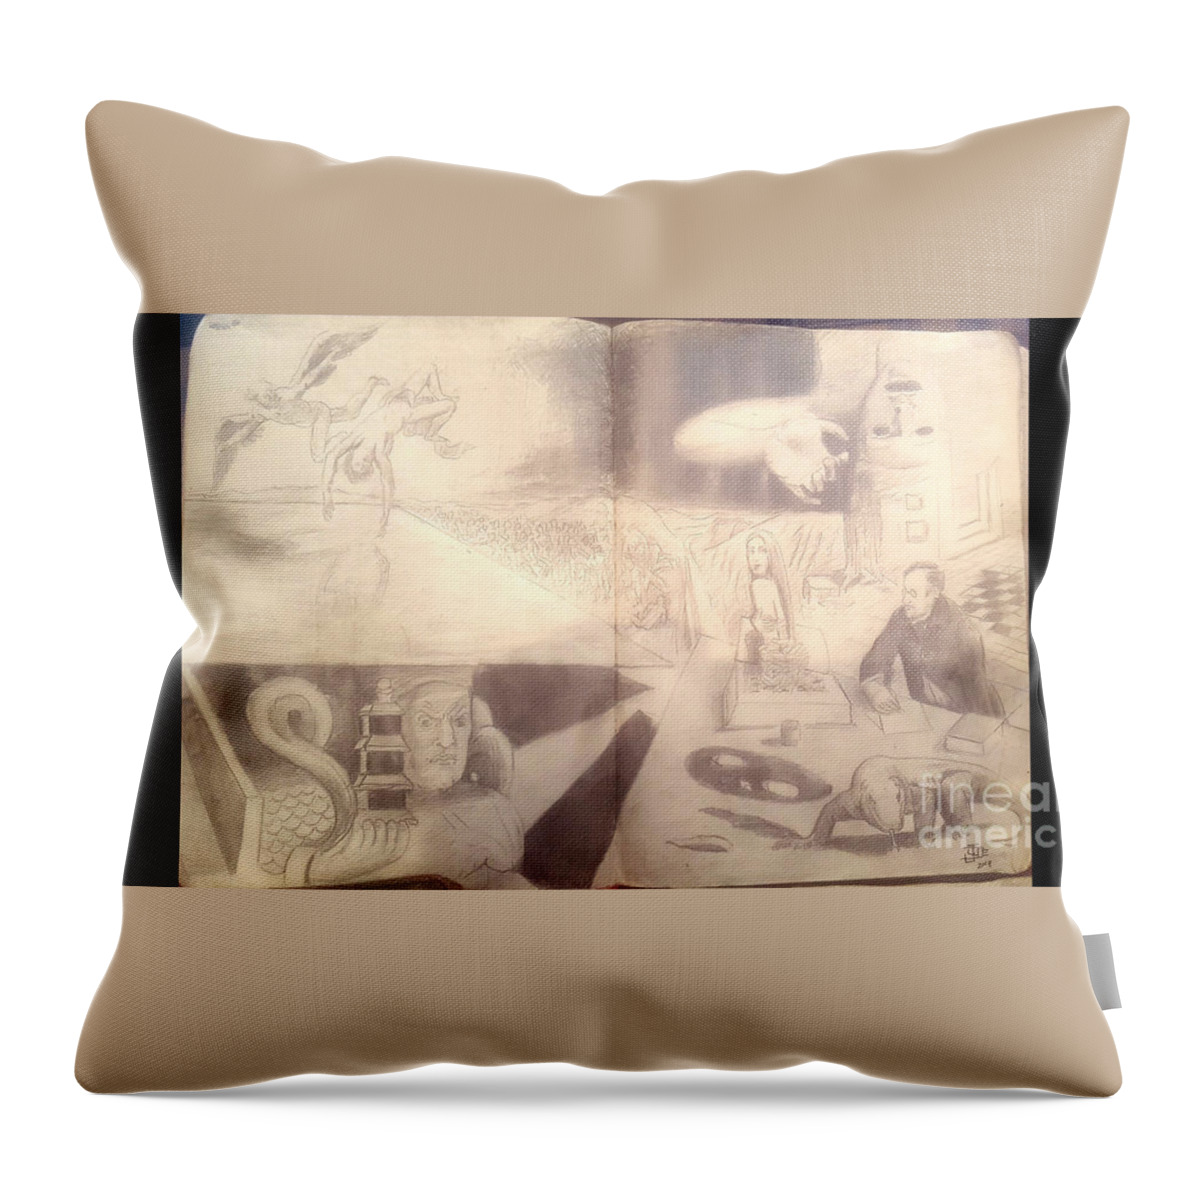  Throw Pillow featuring the drawing Divine Grace by Jude Darrien